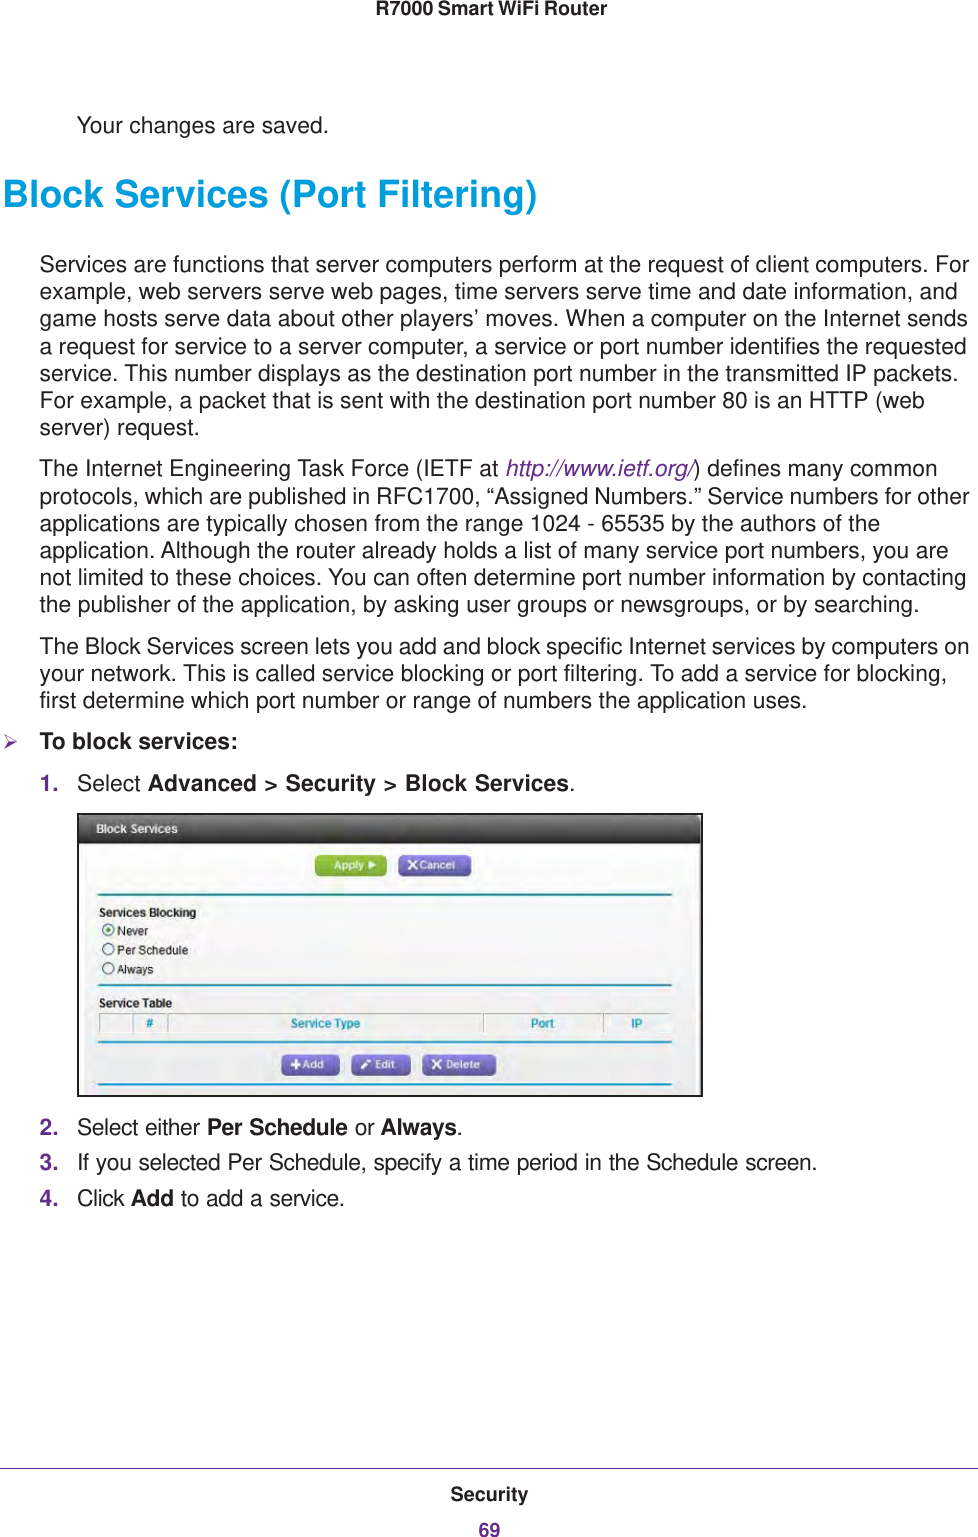 Security69 R7000 Smart WiFi RouterYour changes are saved.Block Services (Port Filtering)Services are functions that server computers perform at the request of client computers. For example, web servers serve web pages, time servers serve time and date information, and game hosts serve data about other players’ moves. When a computer on the Internet sends a request for service to a server computer, a service or port number identifies the requested service. This number displays as the destination port number in the transmitted IP packets. For example, a packet that is sent with the destination port number 80 is an HTTP (web server) request. The Internet Engineering Task Force (IETF at http://www.ietf.org/) defines many common protocols, which are published in RFC1700, “Assigned Numbers.” Service numbers for other applications are typically chosen from the range 1024 - 65535 by the authors of the application. Although the router already holds a list of many service port numbers, you are not limited to these choices. You can often determine port number information by contacting the publisher of the application, by asking user groups or newsgroups, or by searching.The Block Services screen lets you add and block specific Internet services by computers on your network. This is called service blocking or port filtering. To add a service for blocking, first determine which port number or range of numbers the application uses. To block services:1. Select Advanced &gt; Security &gt; Block Services.2. Select either Per Schedule or Always.3. If you selected Per Schedule, specify a time period in the Schedule screen.4. Click Add to add a service. 